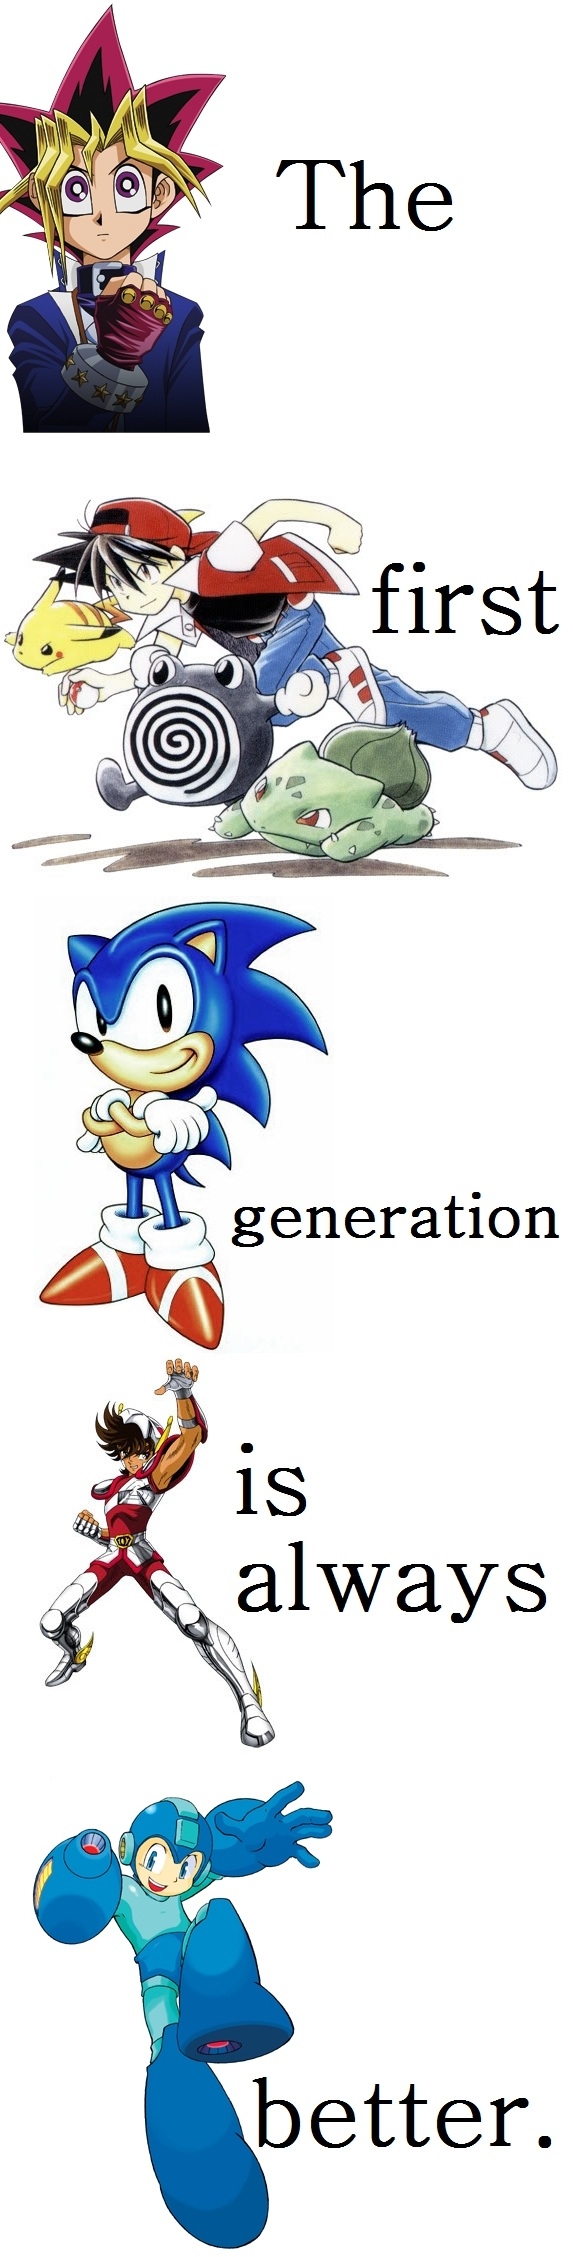 The first generation